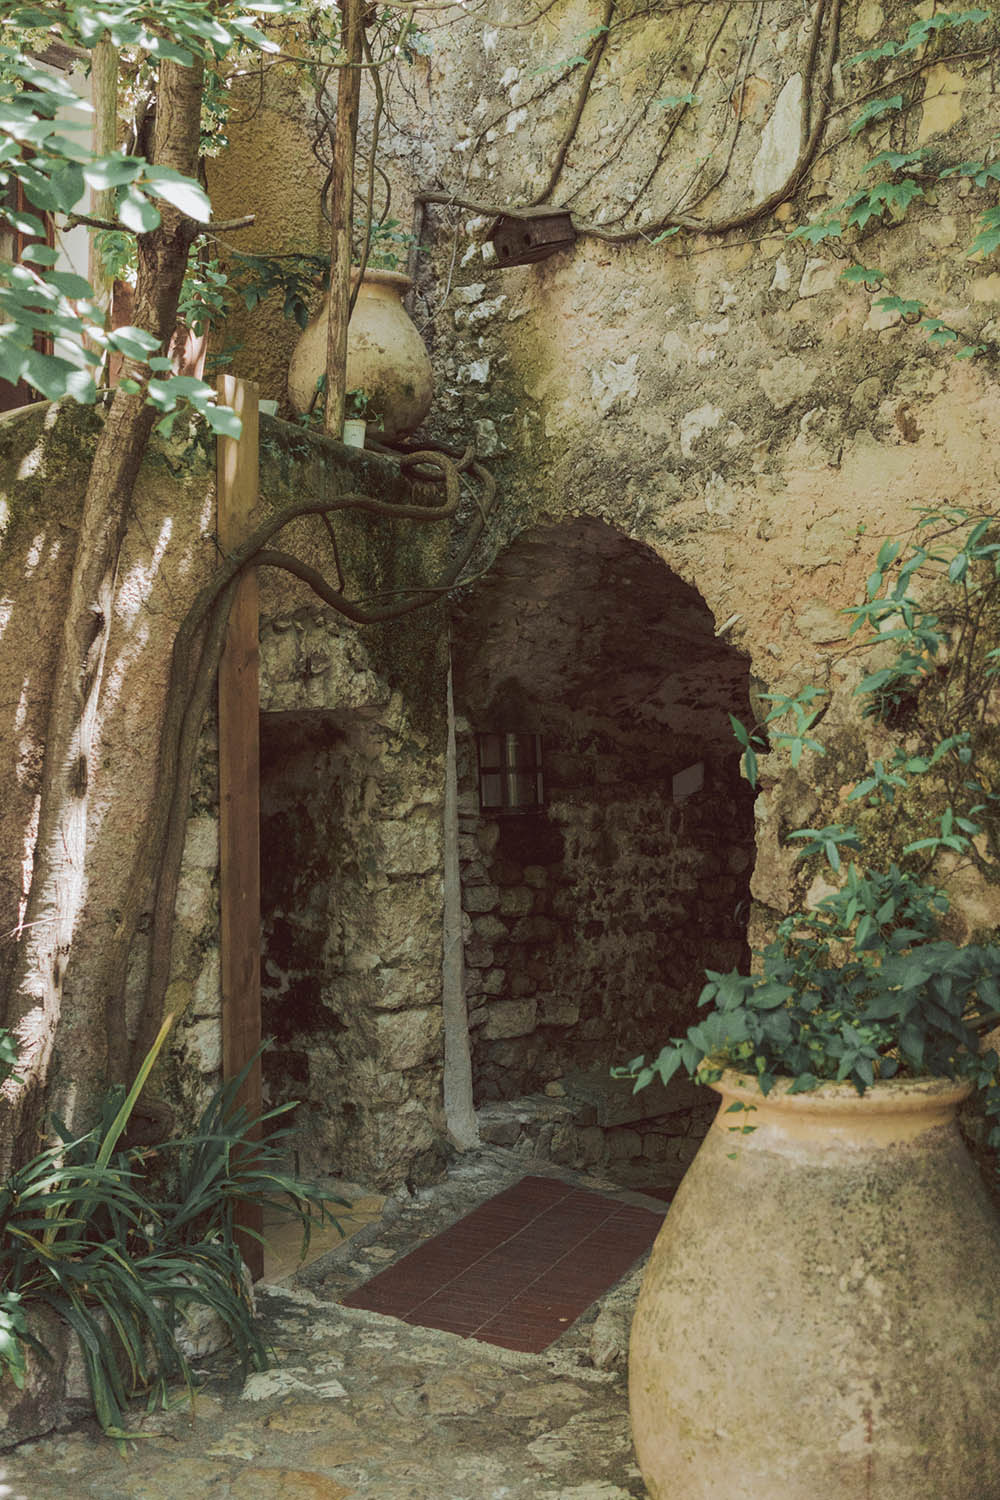 Day Trip To Eze – The South of France Medieval Village